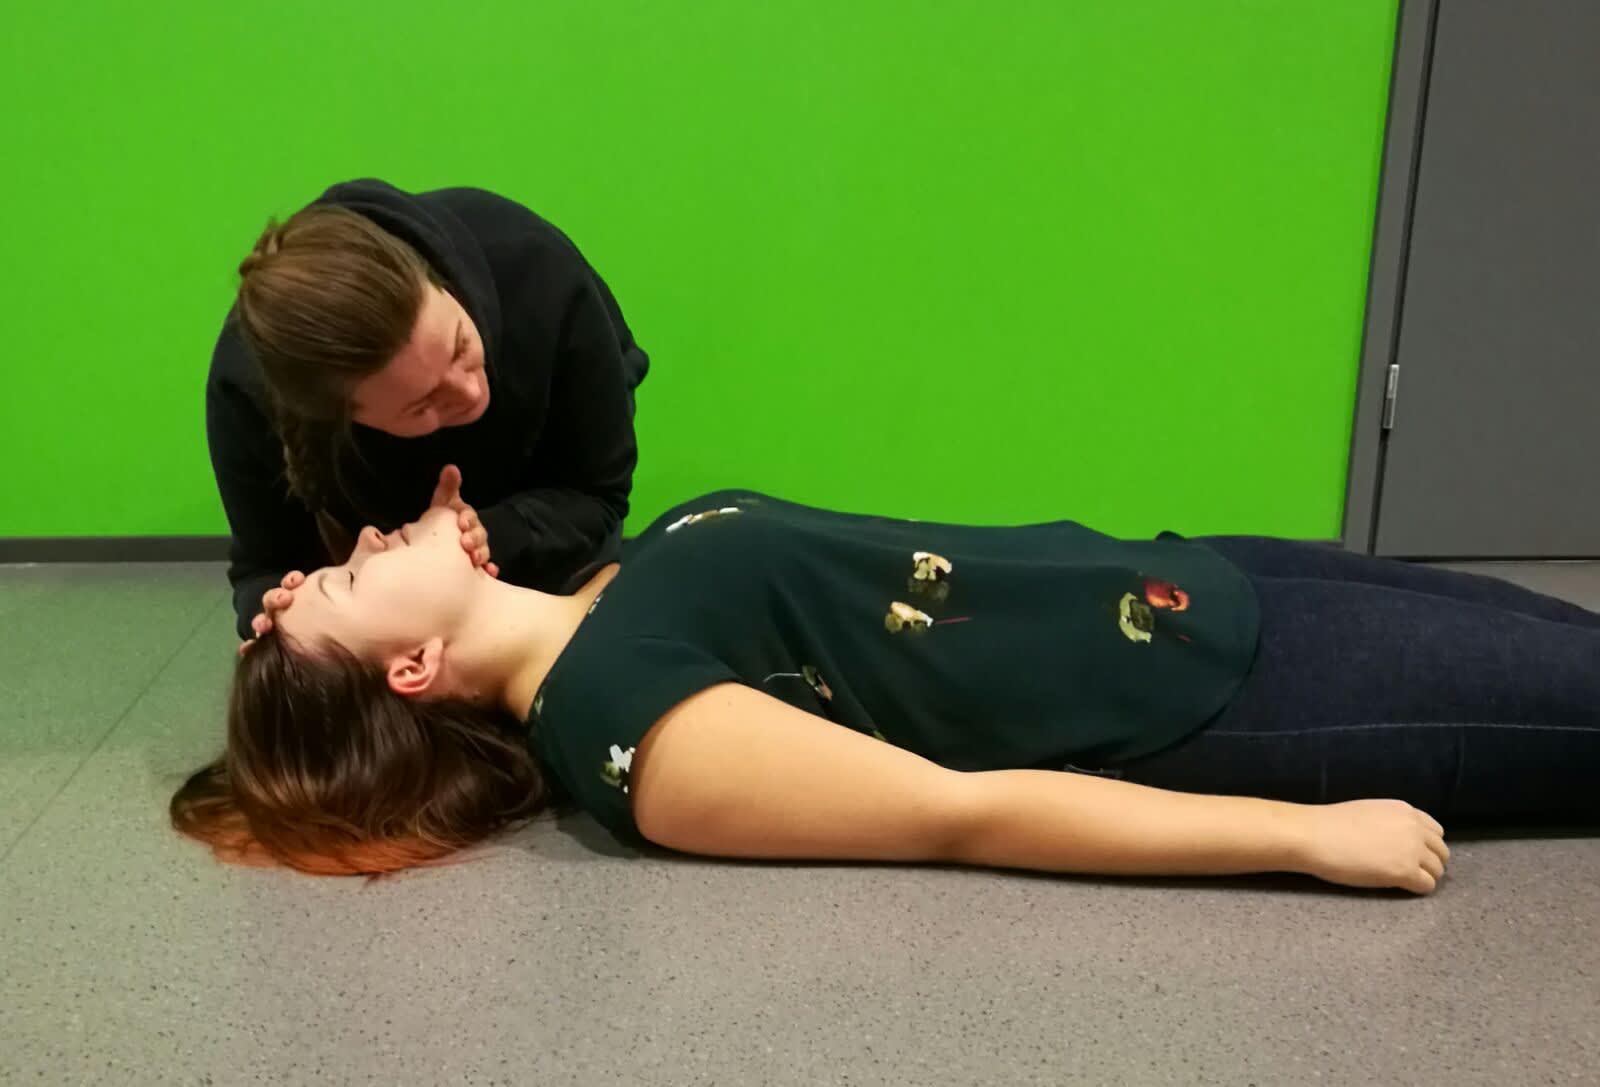 A helper monitors an unconscious person’s airway by monitoring the movement of their chest.